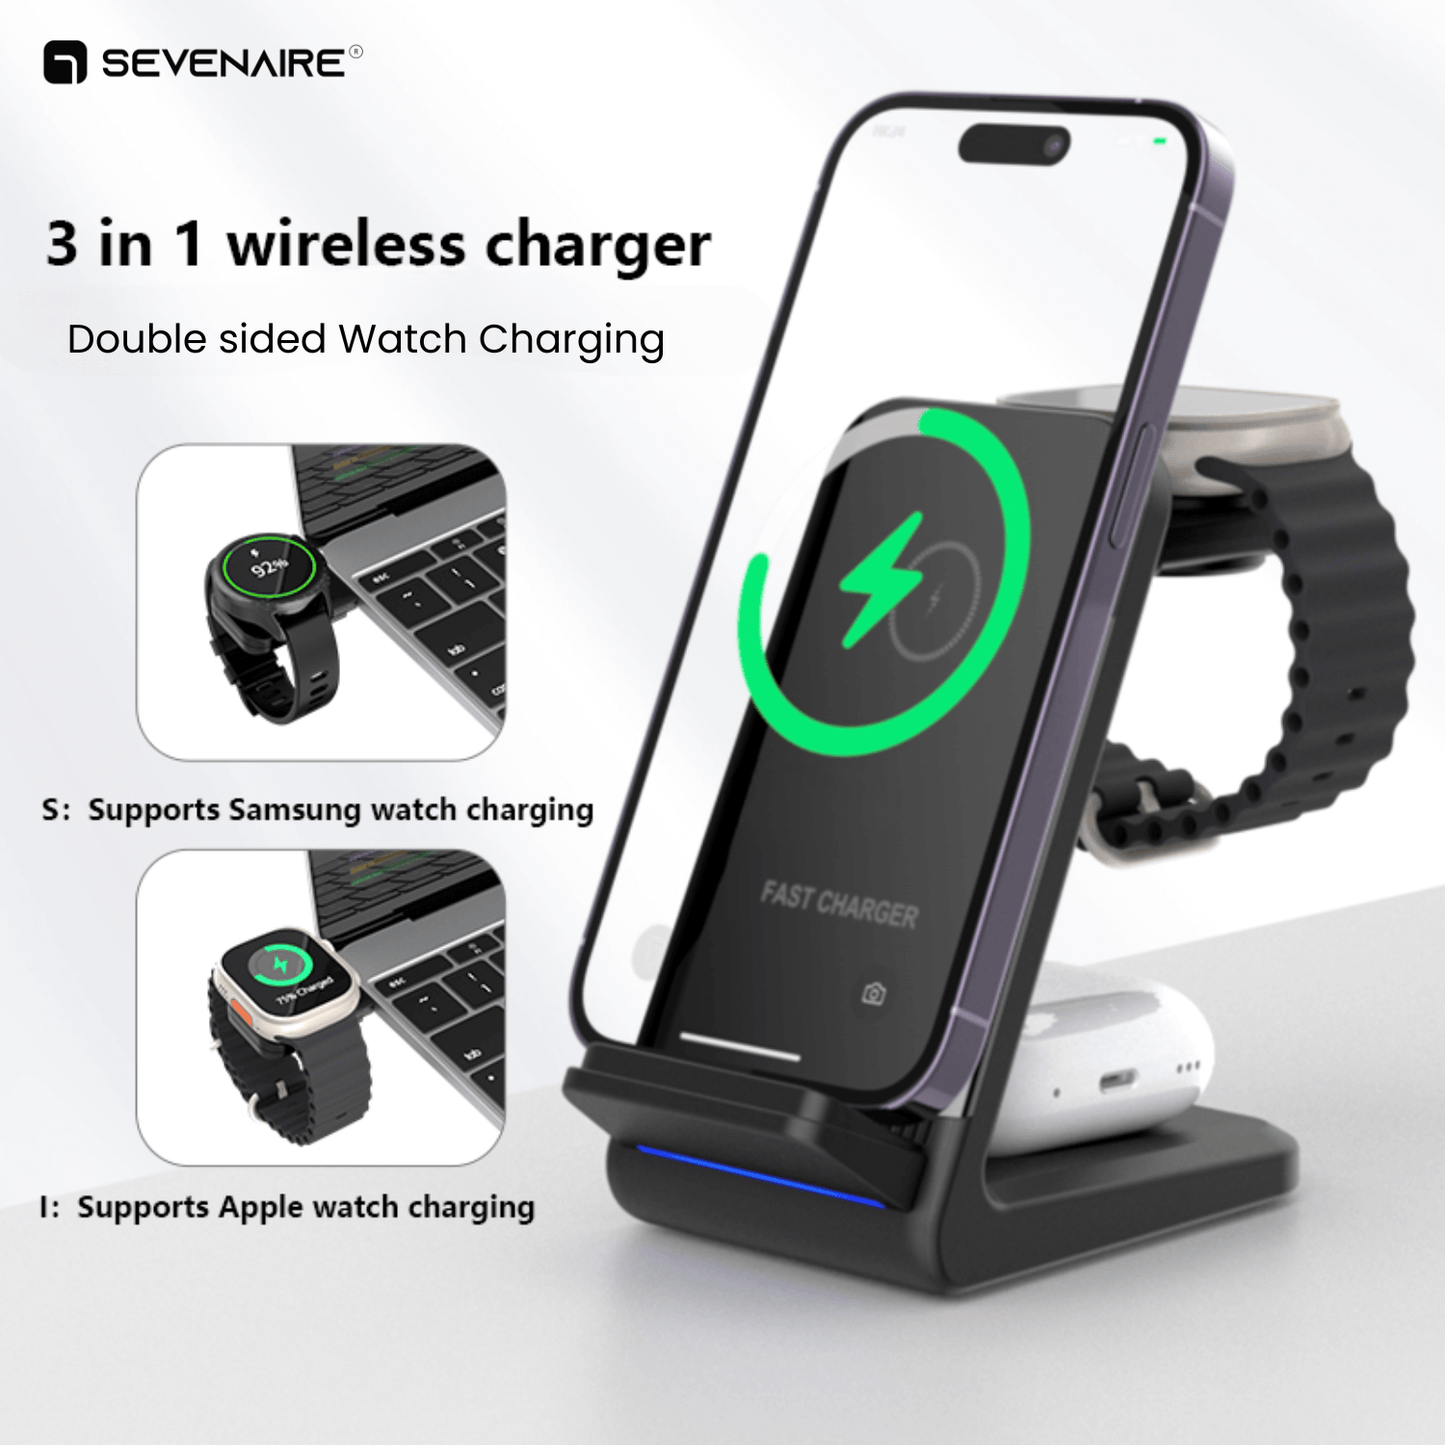 3-in-1 Wireless Charger for Apple, Samsung (D3000)